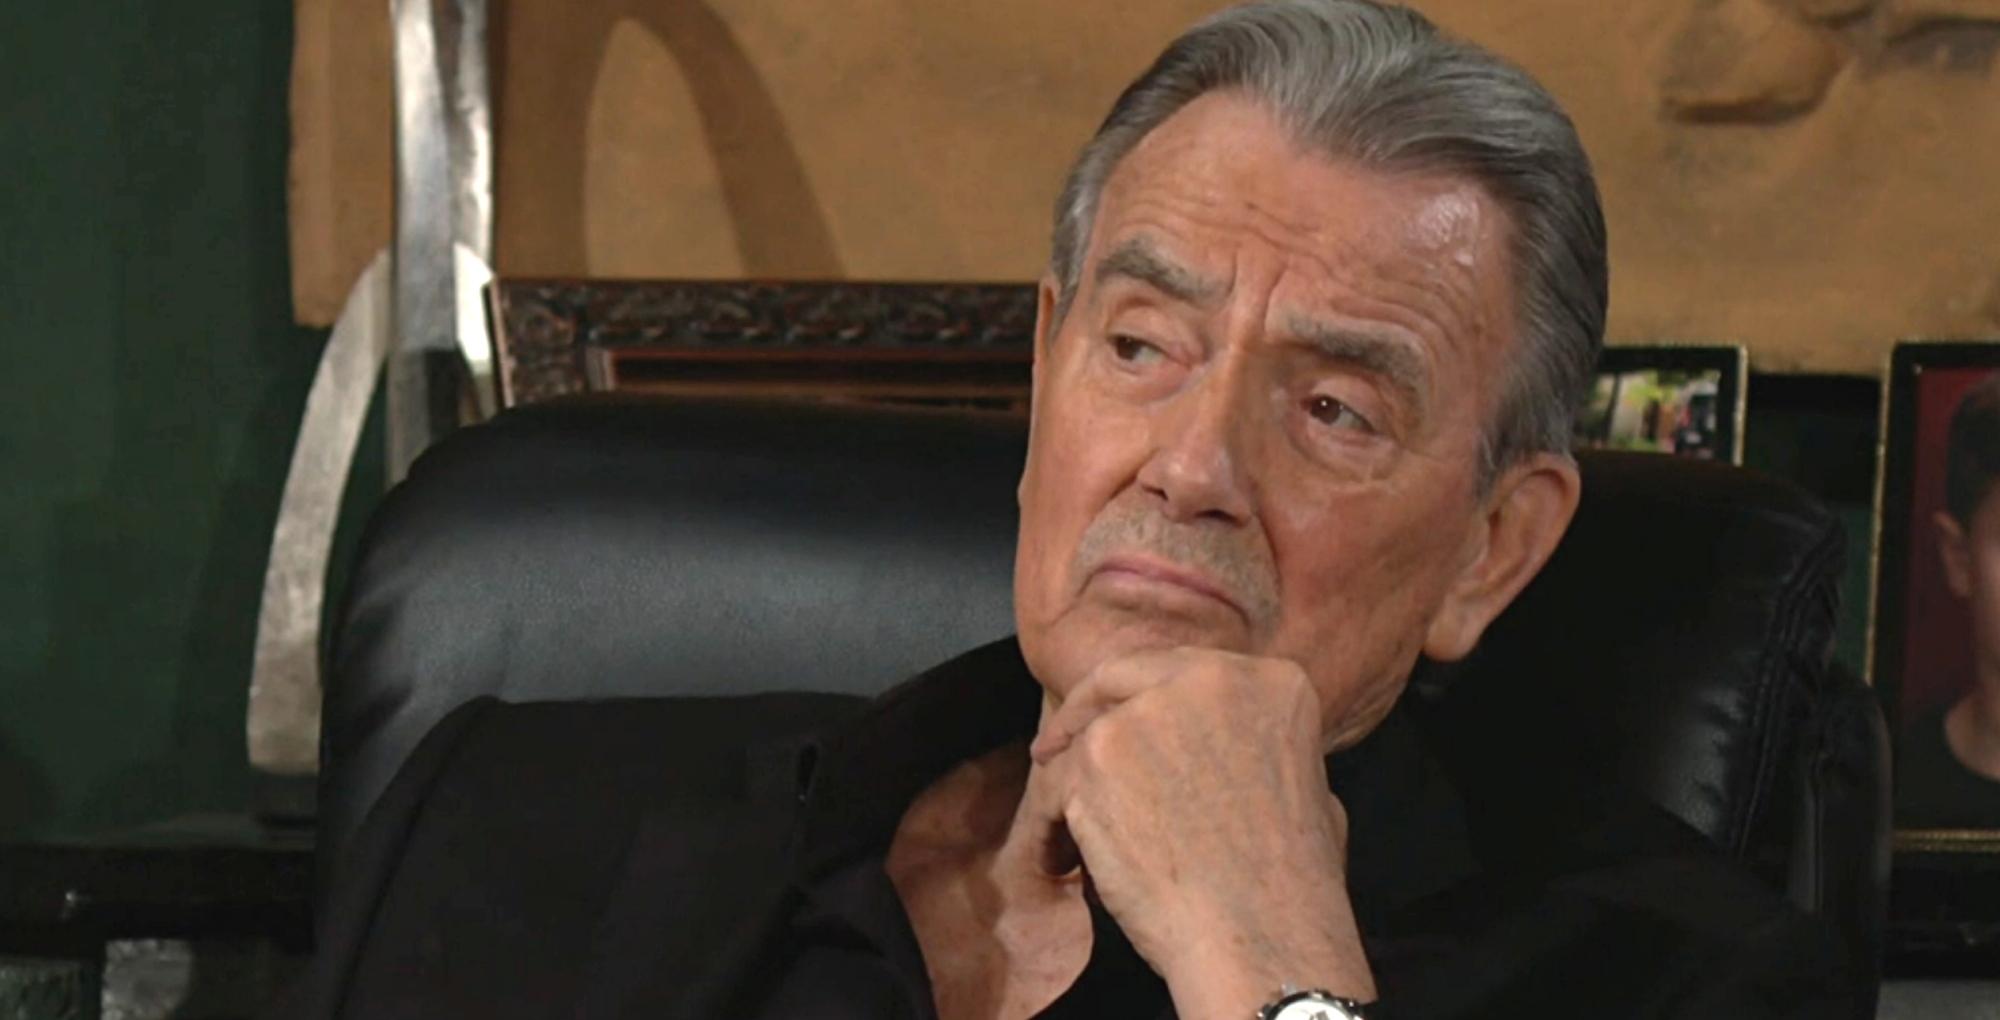 the young and the restless recap for june 23, 2023, has victor newman with his hand on his chin sitting at the office.